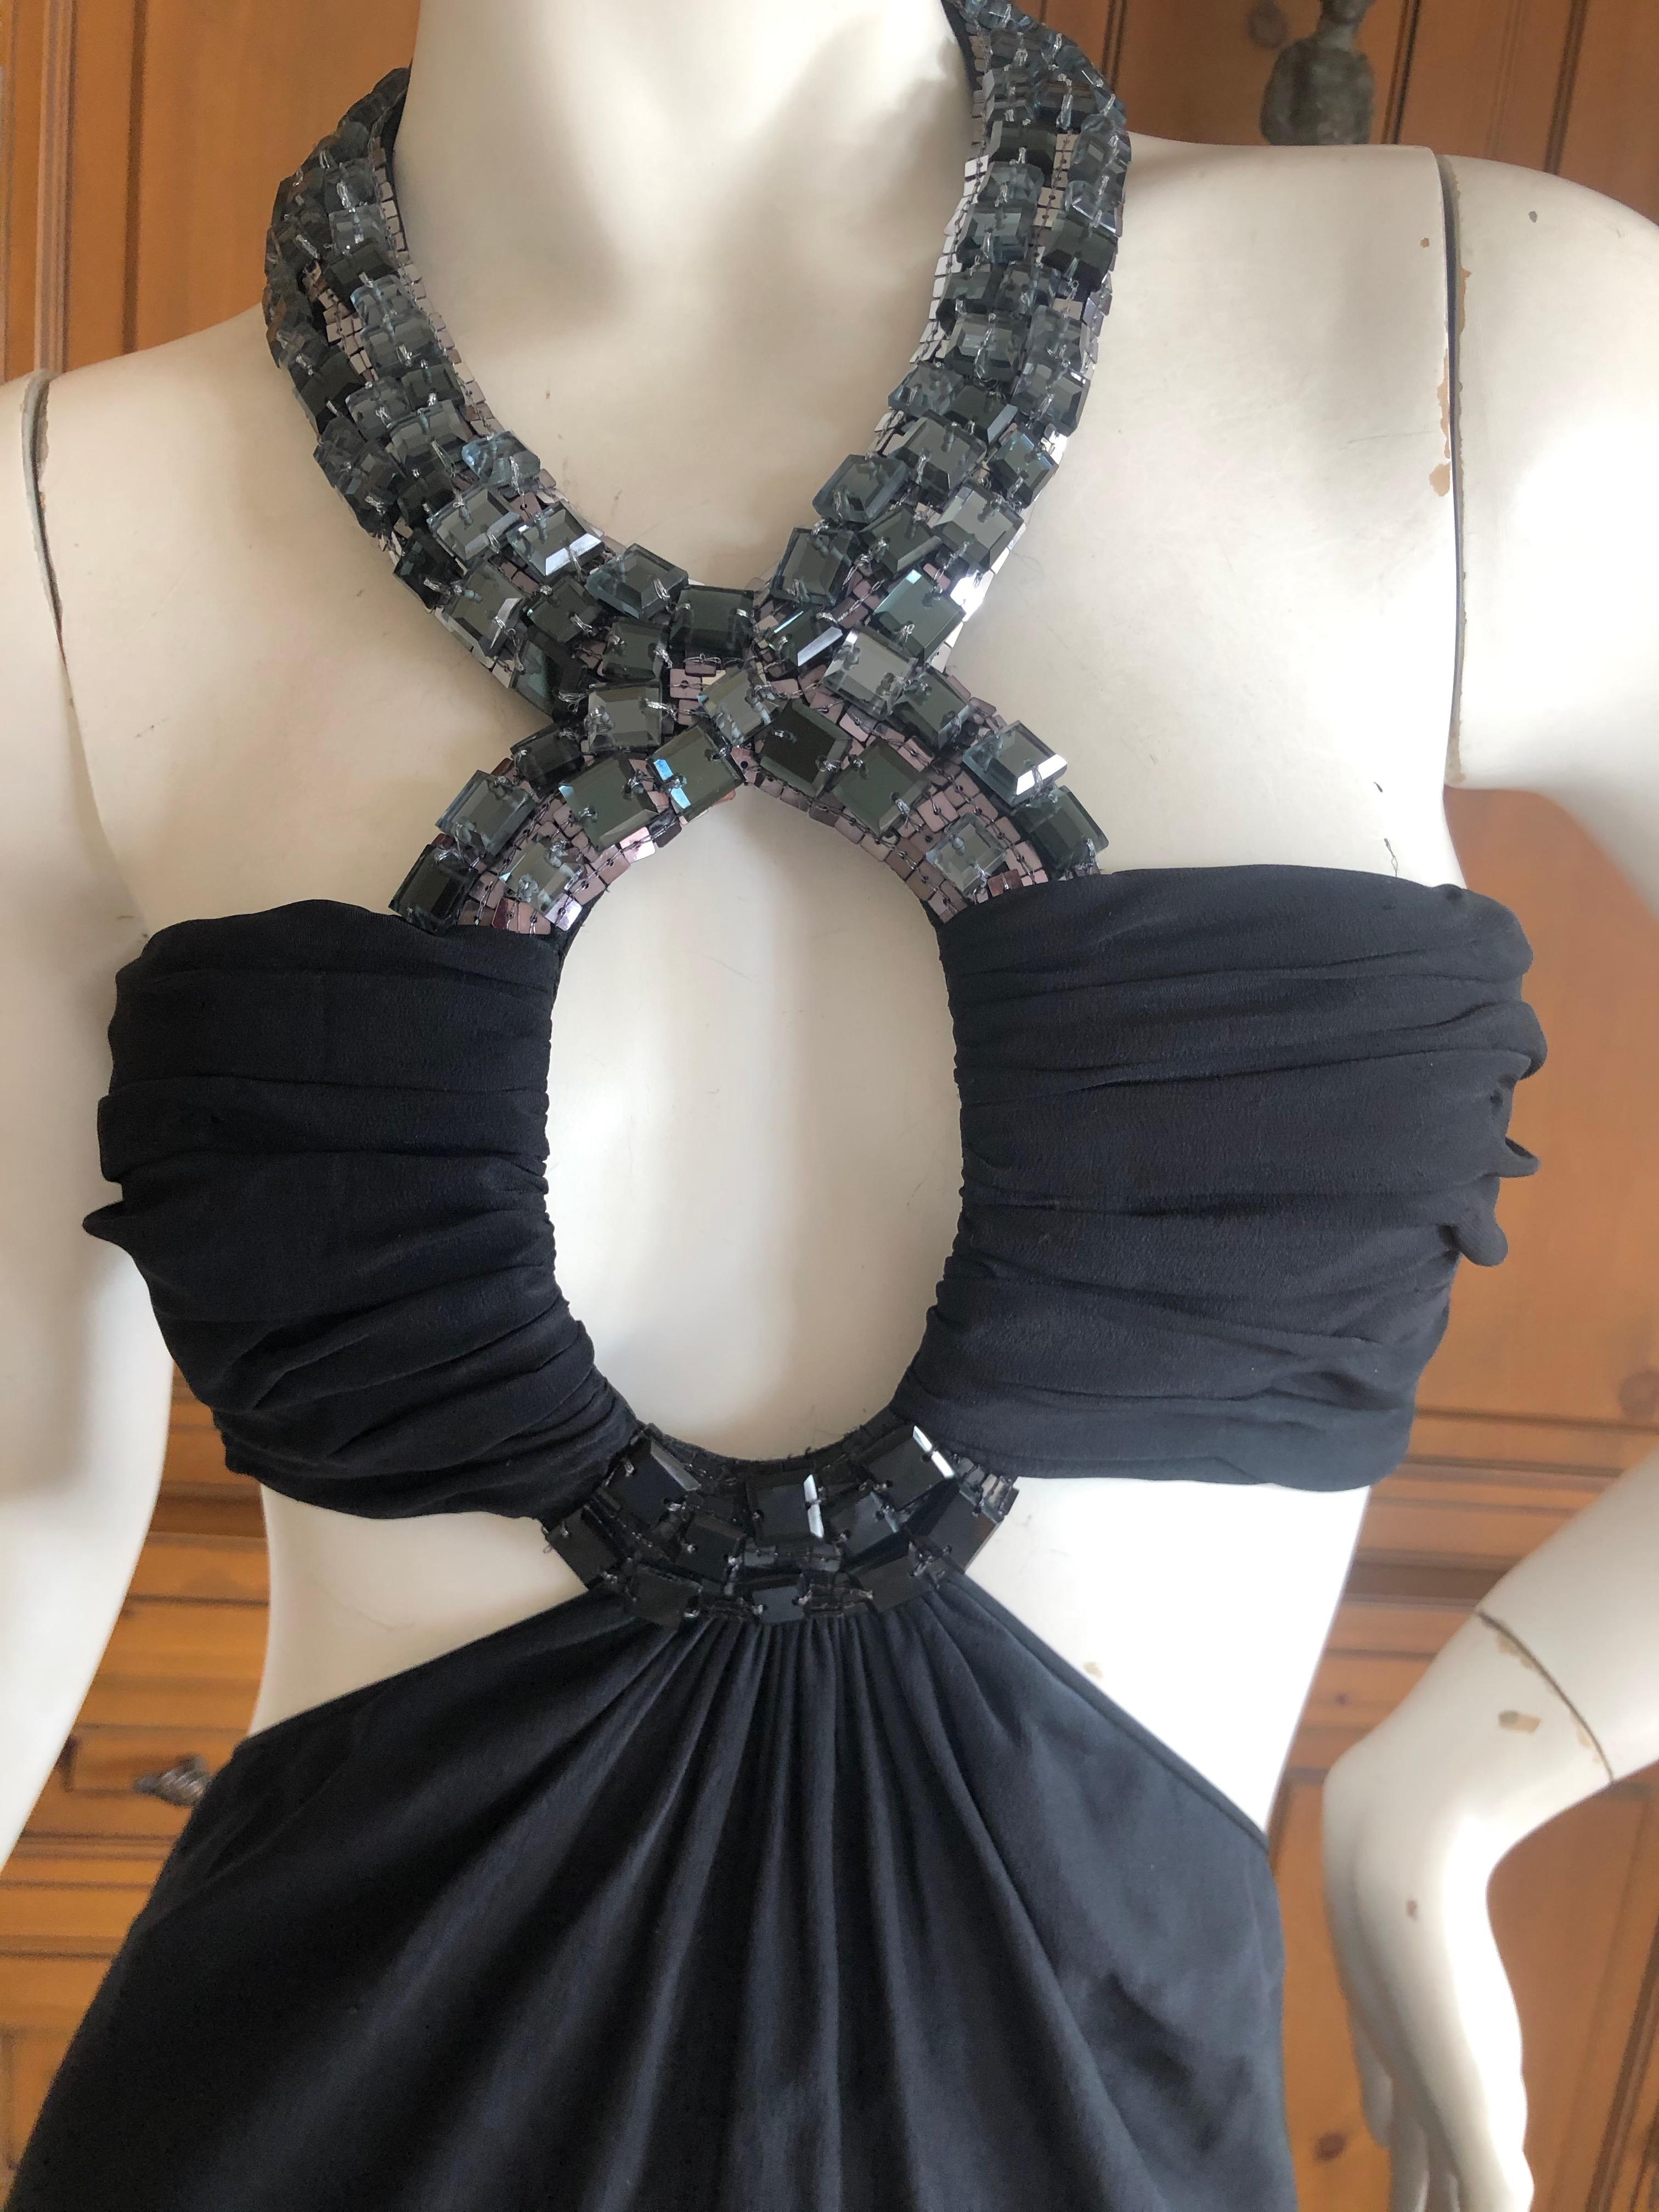 Exquisite Azzaro Black Evening Dress with Bold Crystal Jewel Details
This is so amazing, much prettier than the photos show. 
Huge swags of crystals adorn this beautiful piece , a real showstopper.
Size 36, this is pretty tiny in the bust.
Bust 32